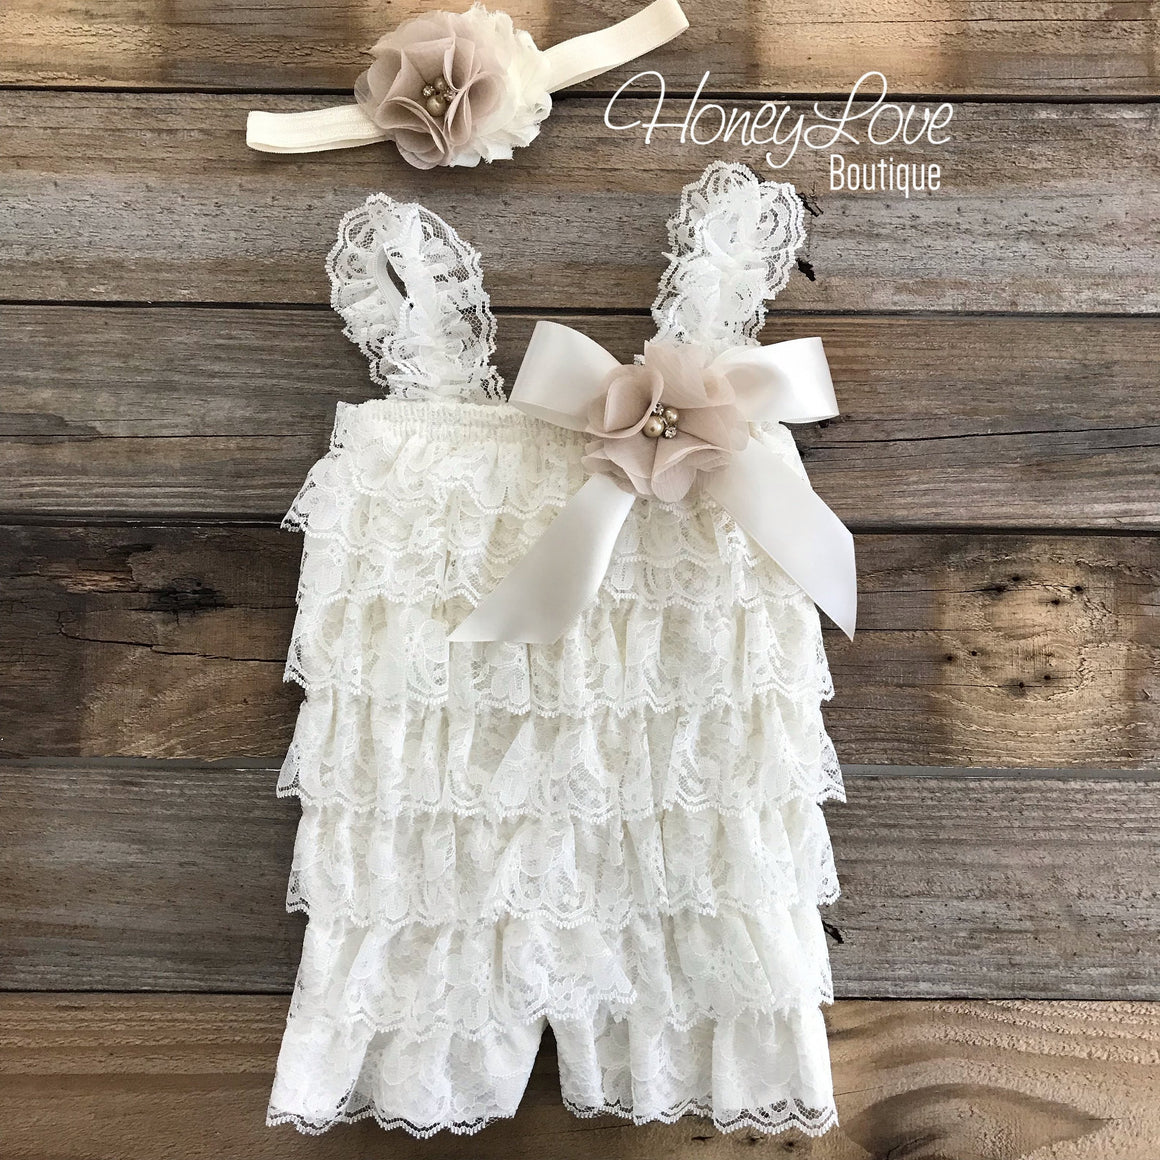 Lace Petti Romper - Ivory and matching flower headband - HoneyLoveBoutique